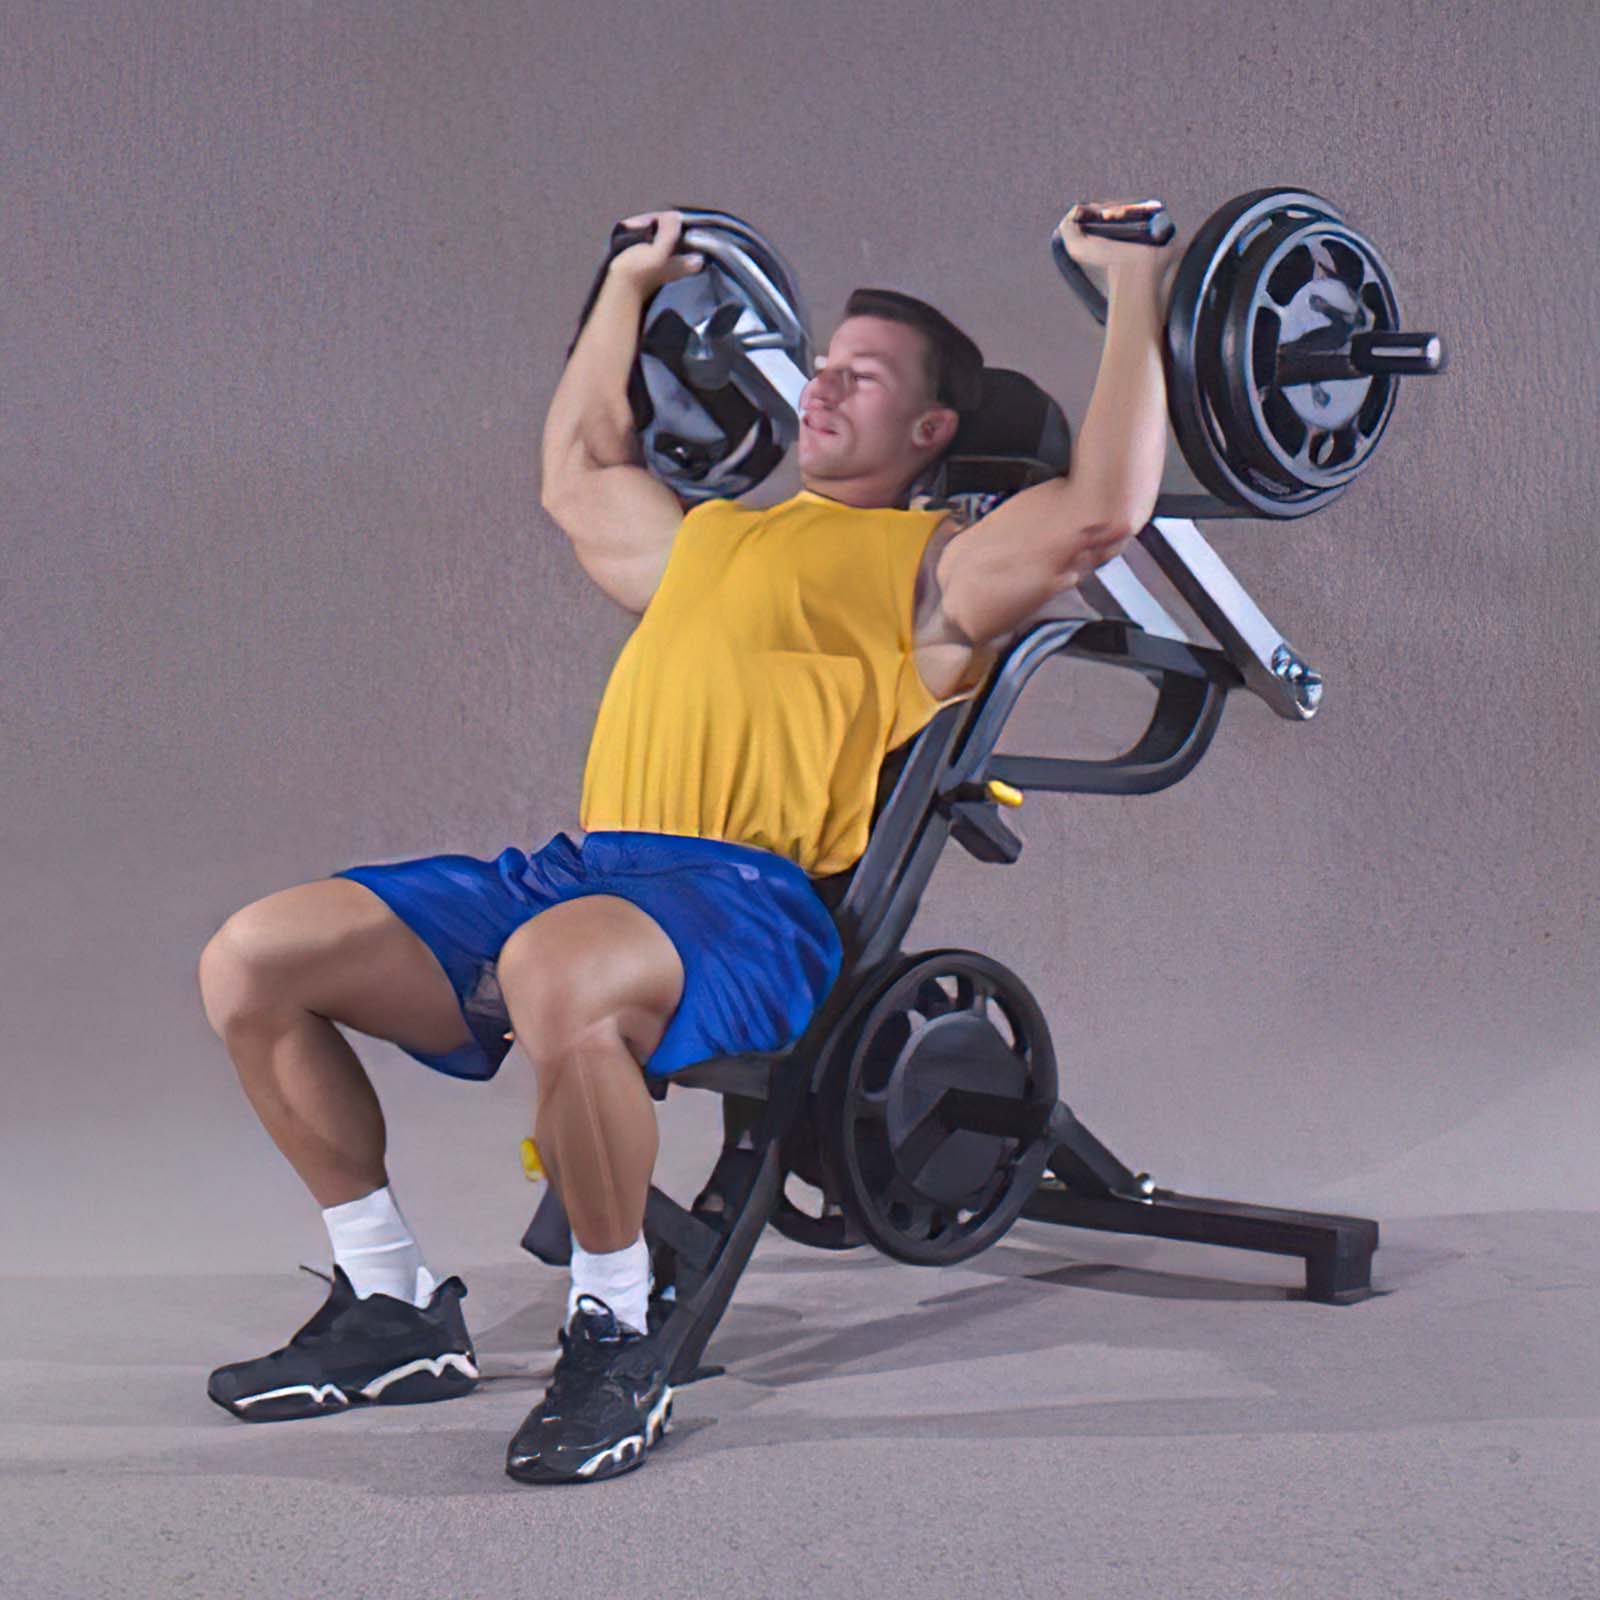 L-SP Powertec Leverage Shoulder Press with a man performing the exercise